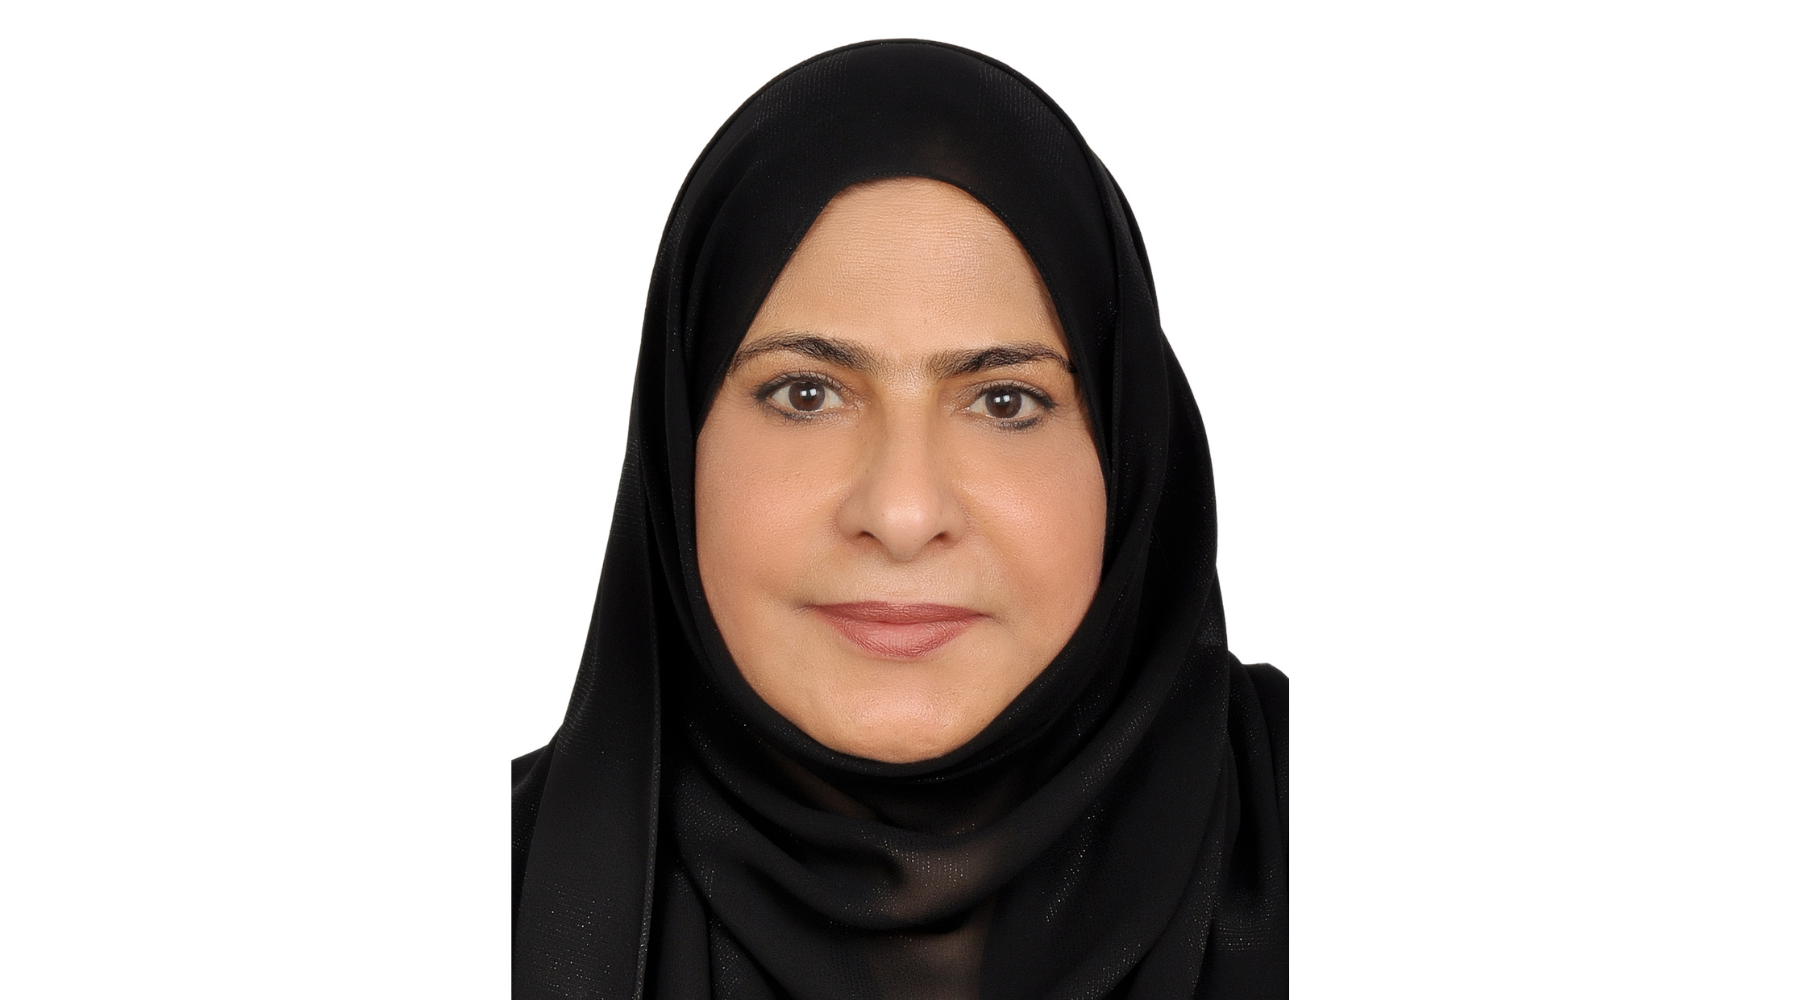 SH Capital Appoints HE Sheikha Moaza Al Maktoum as Chairperson of the Board of Directors